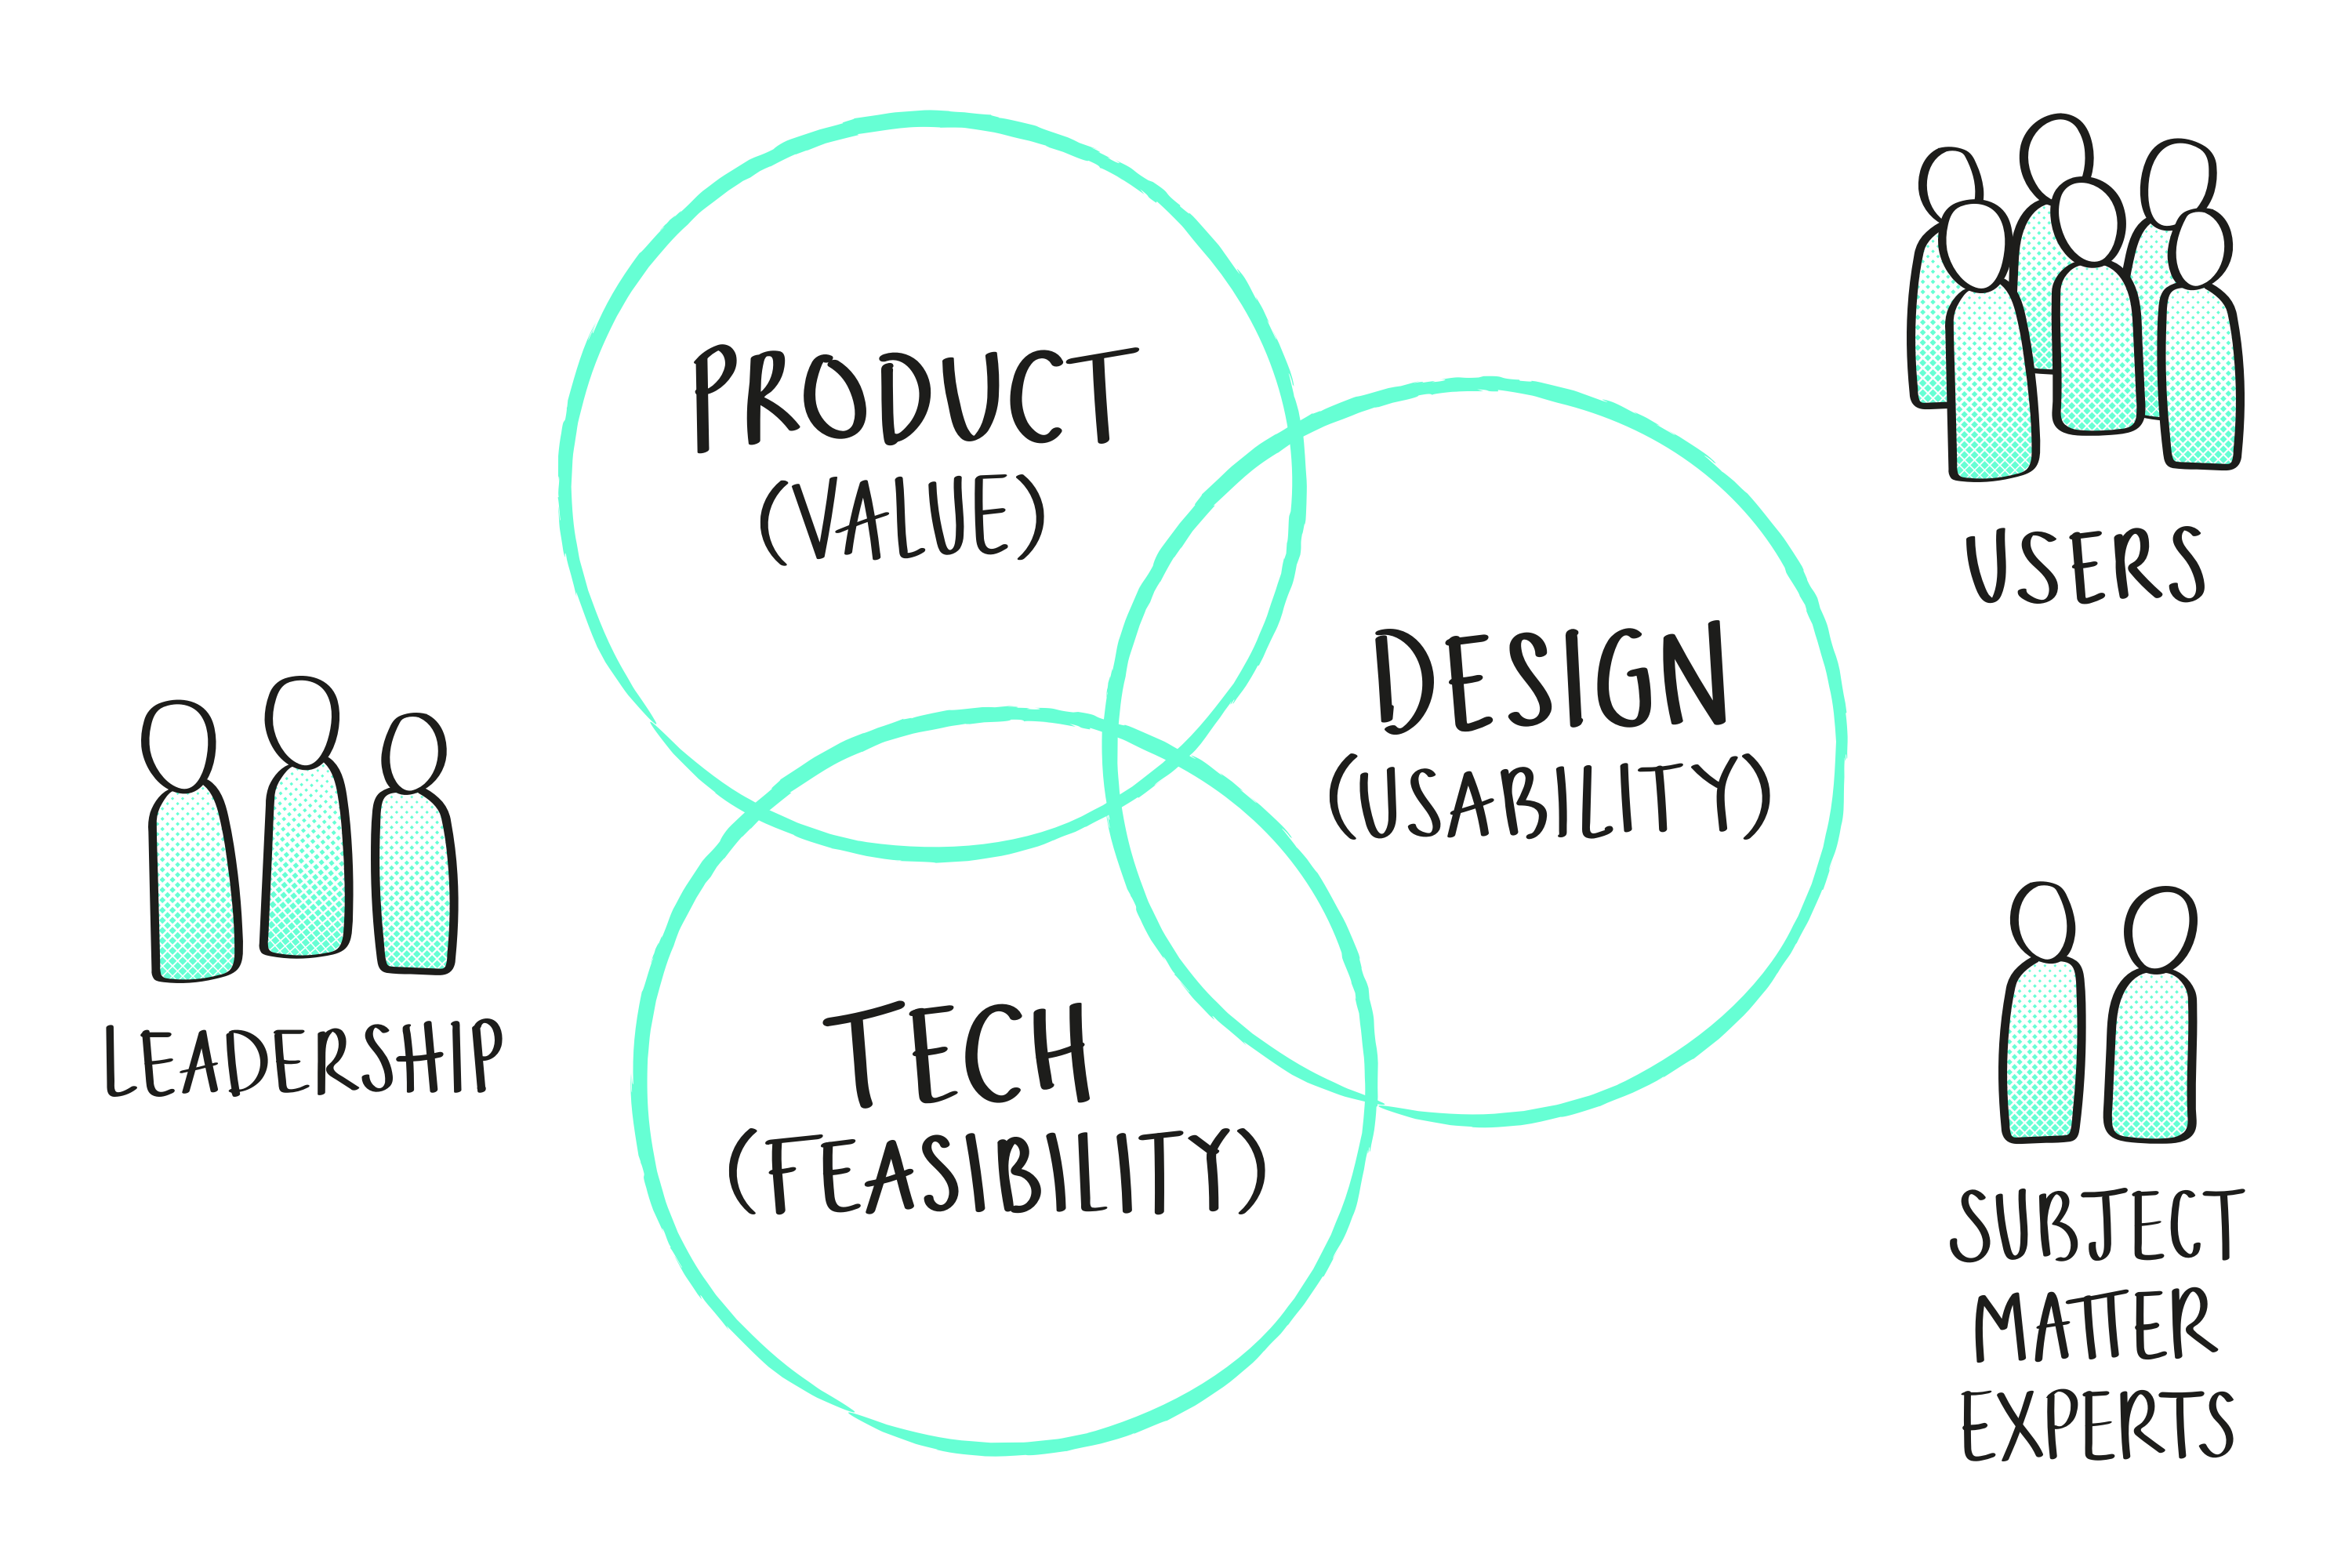 Venn diagram of Product, Design, and Tech – encircled by Users, Leadership and Subject Matter Experts